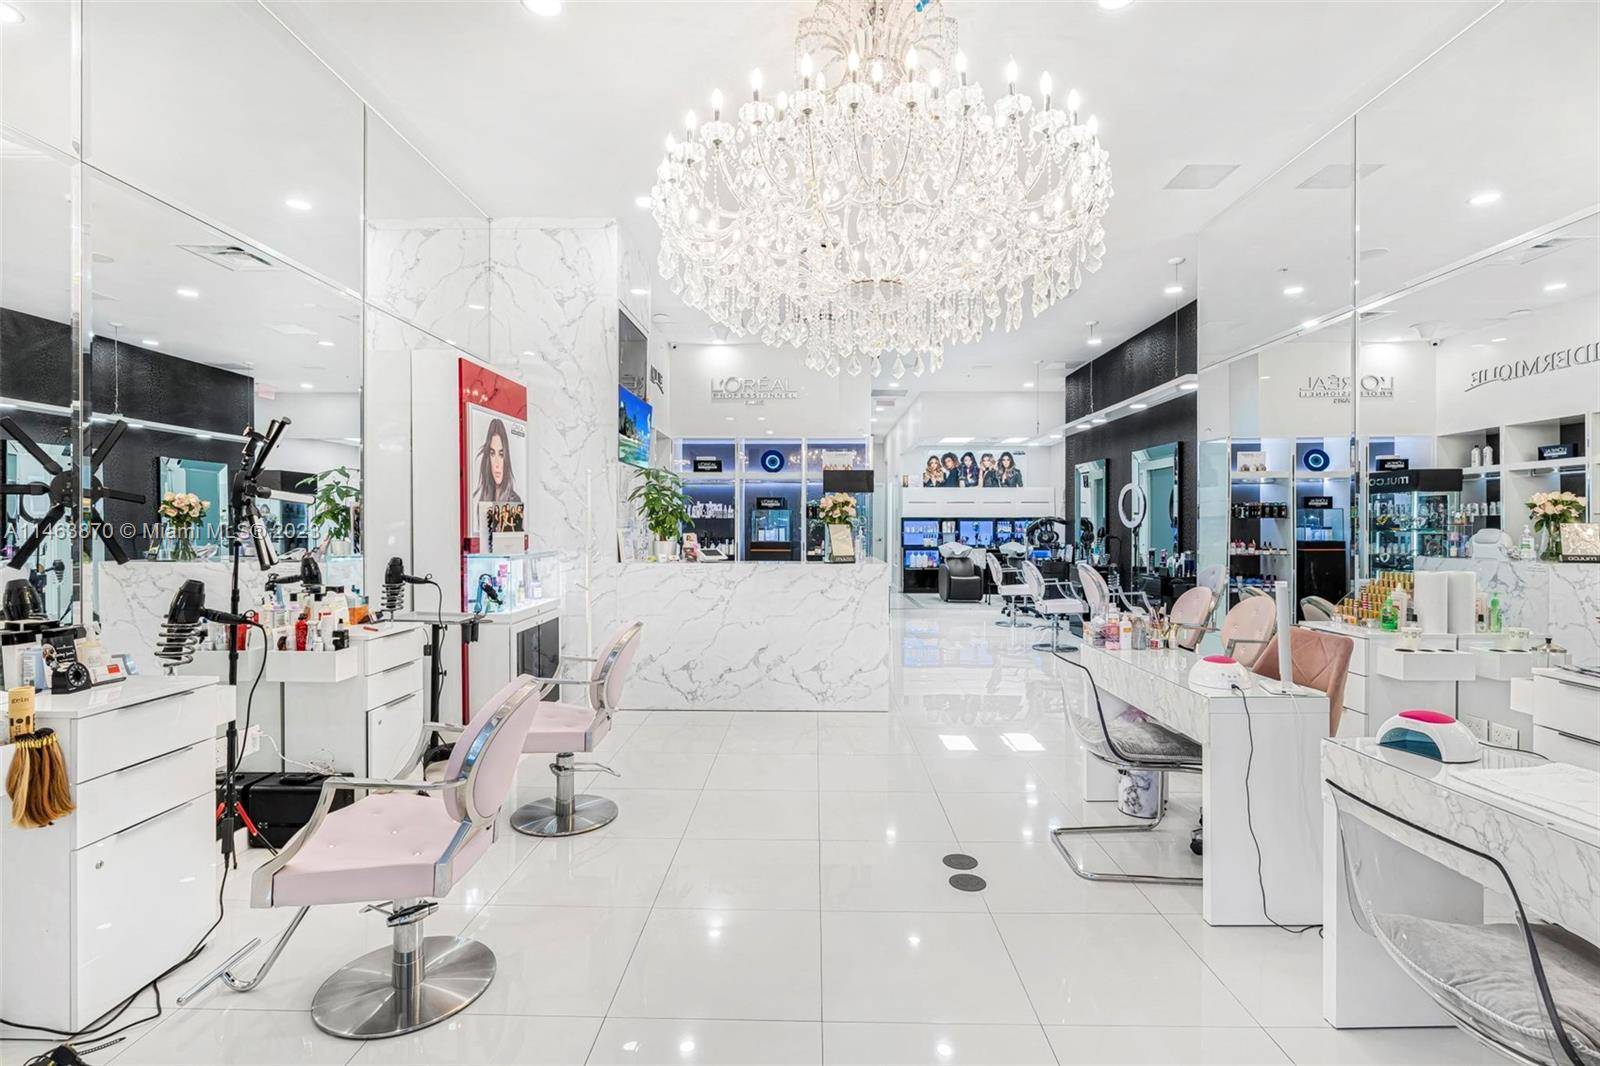 Turnkey Beauty Spa Center Midtown Doral location, 20K month from suite leases alone.